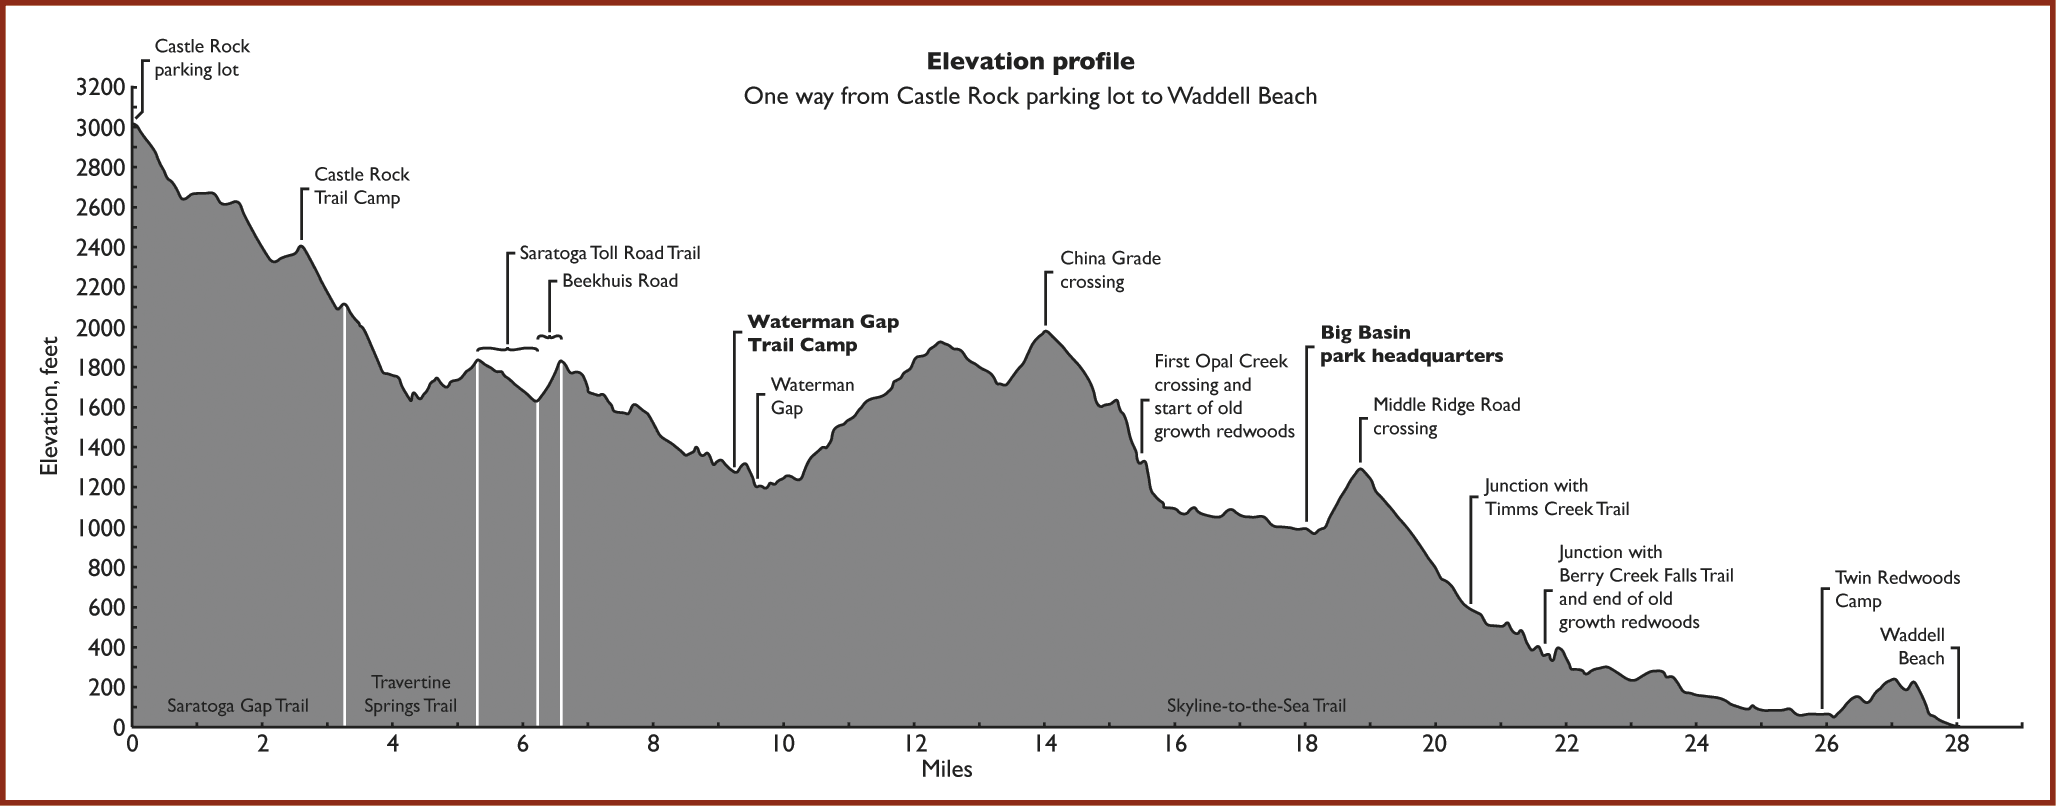 Elevation profile of the the Skyline-to-the-Sea Trail, alternate route